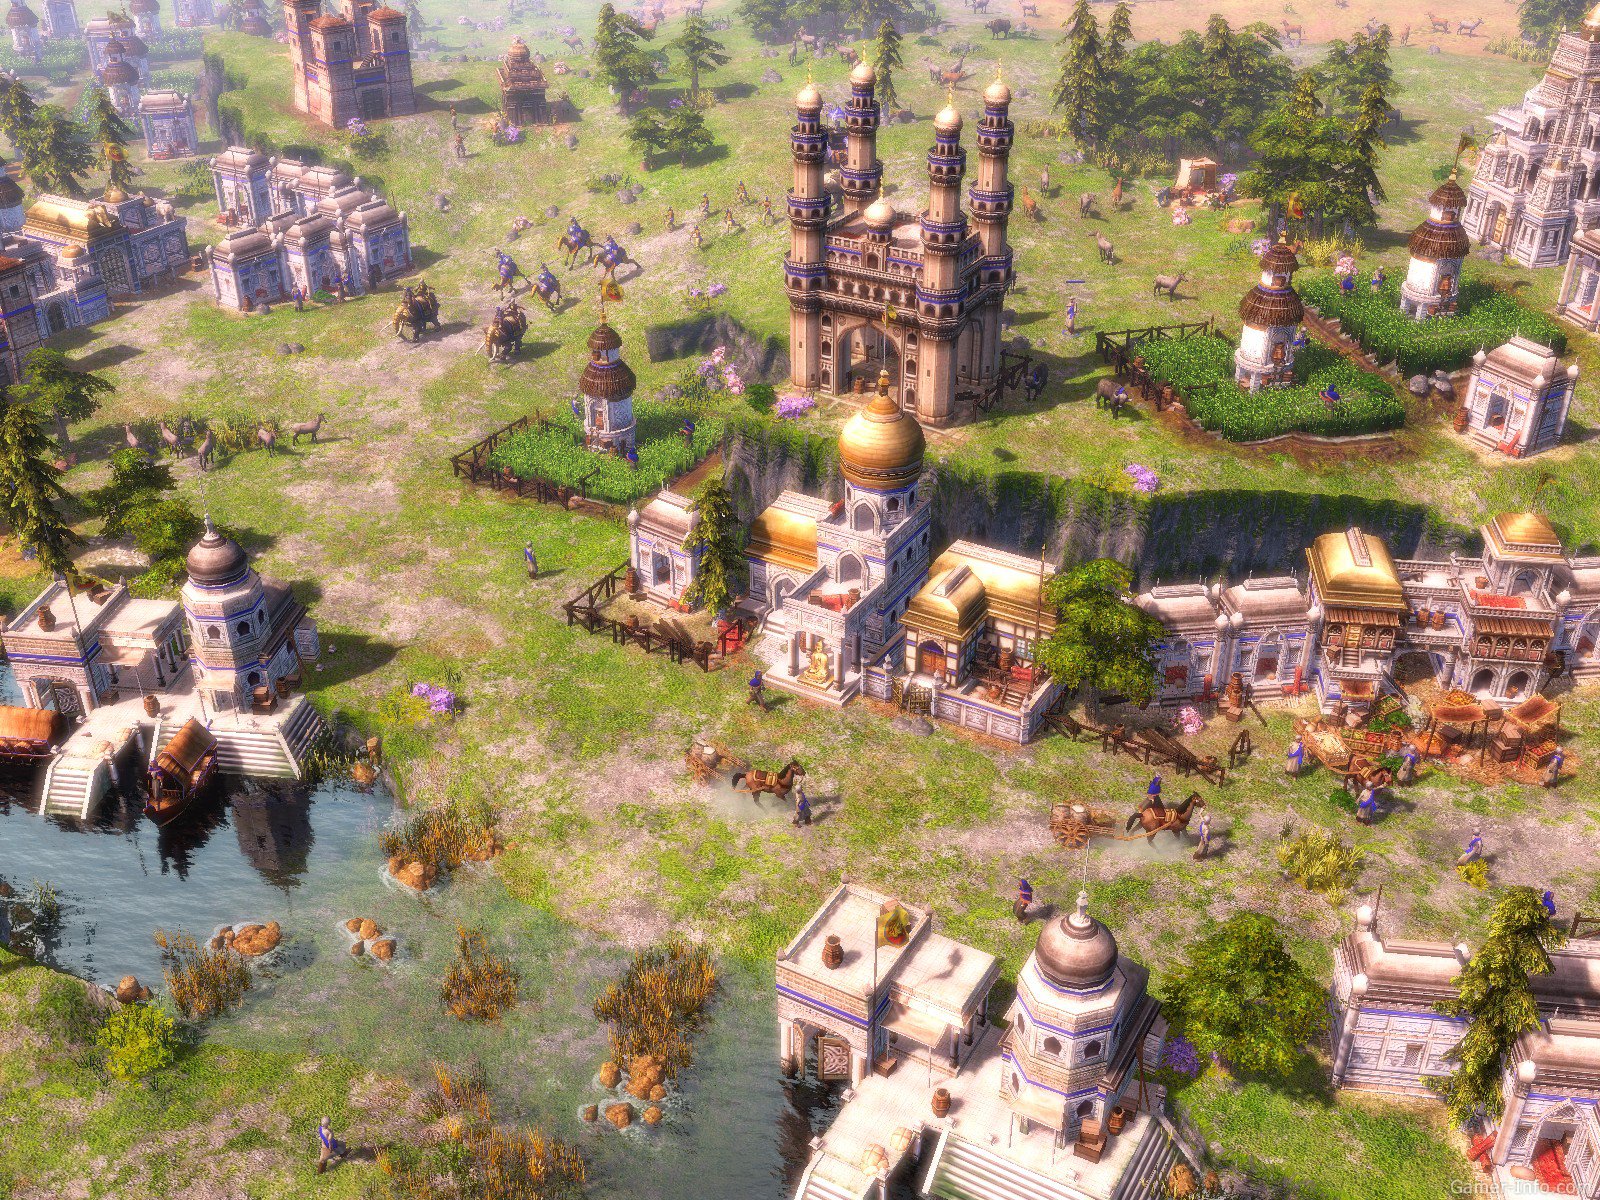 age of empires 3 product key